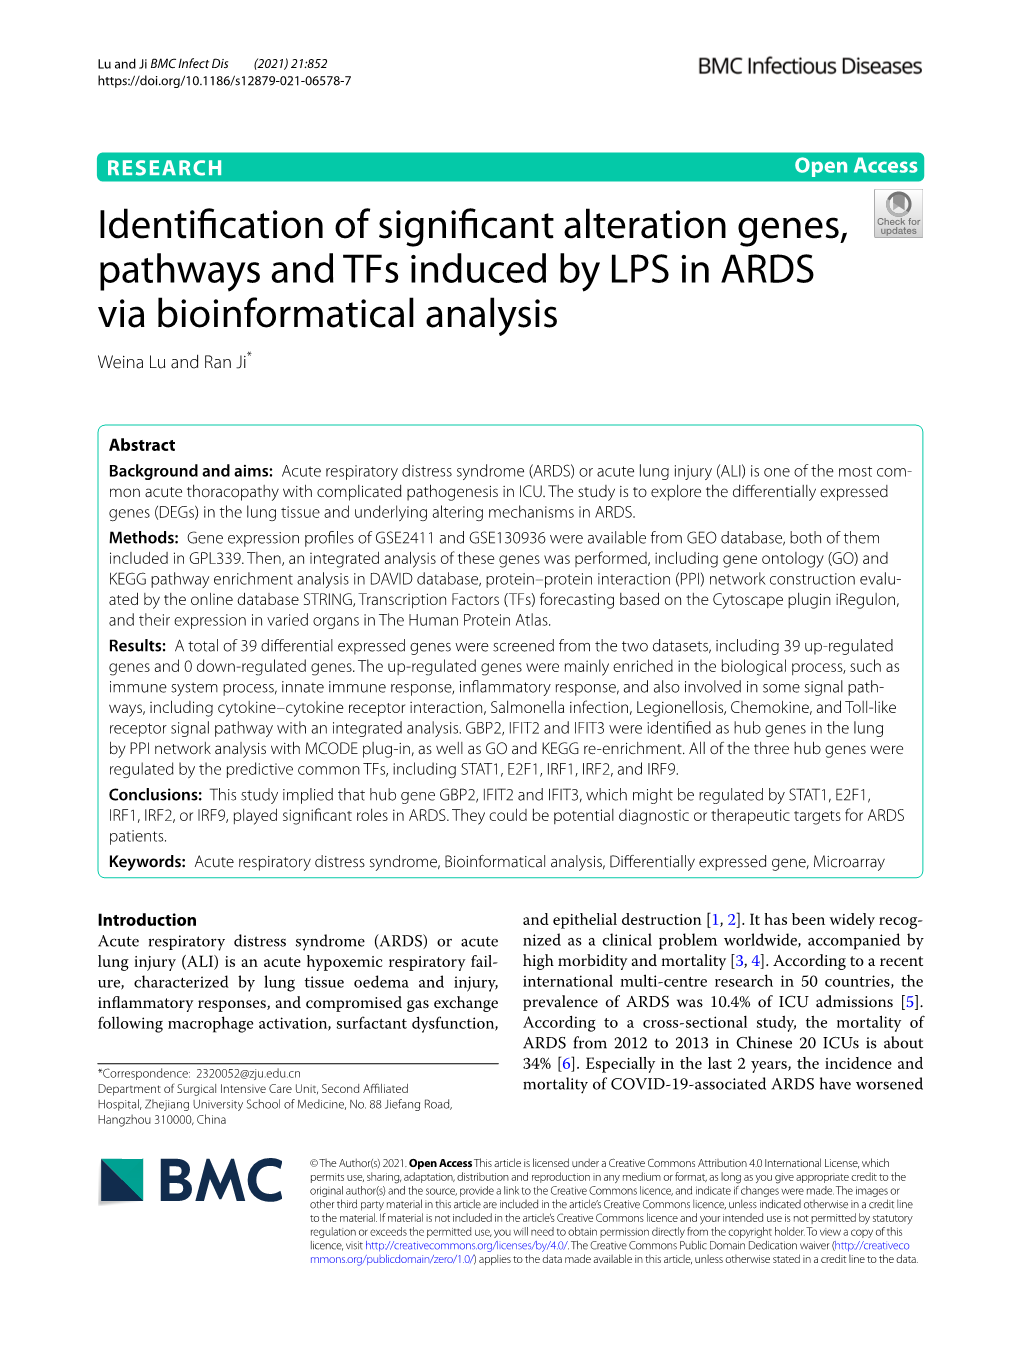 Identification of Significant Alteration Genes, Pathways and Tfs Induced